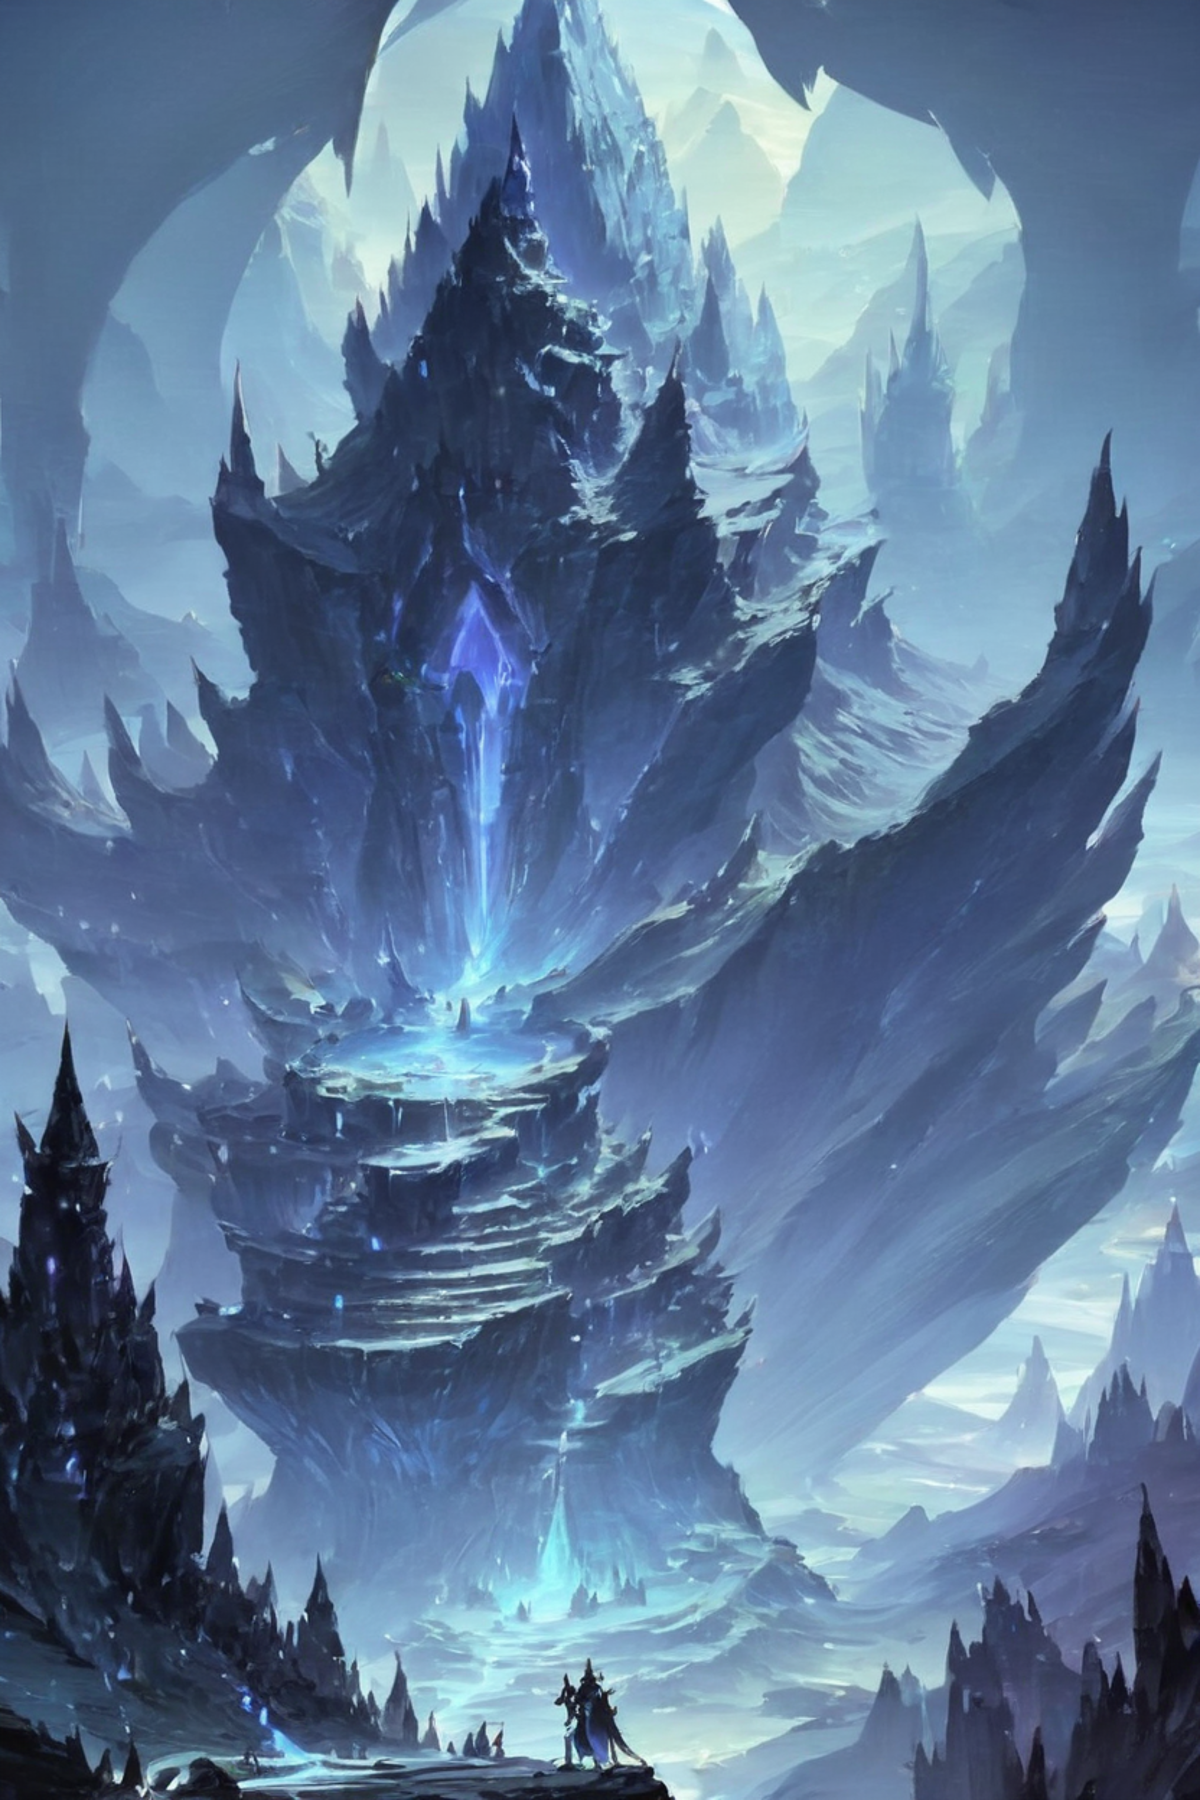 A fantasy artwork of a large mountain with a blue light in the center, surrounded by other mountains and trees.